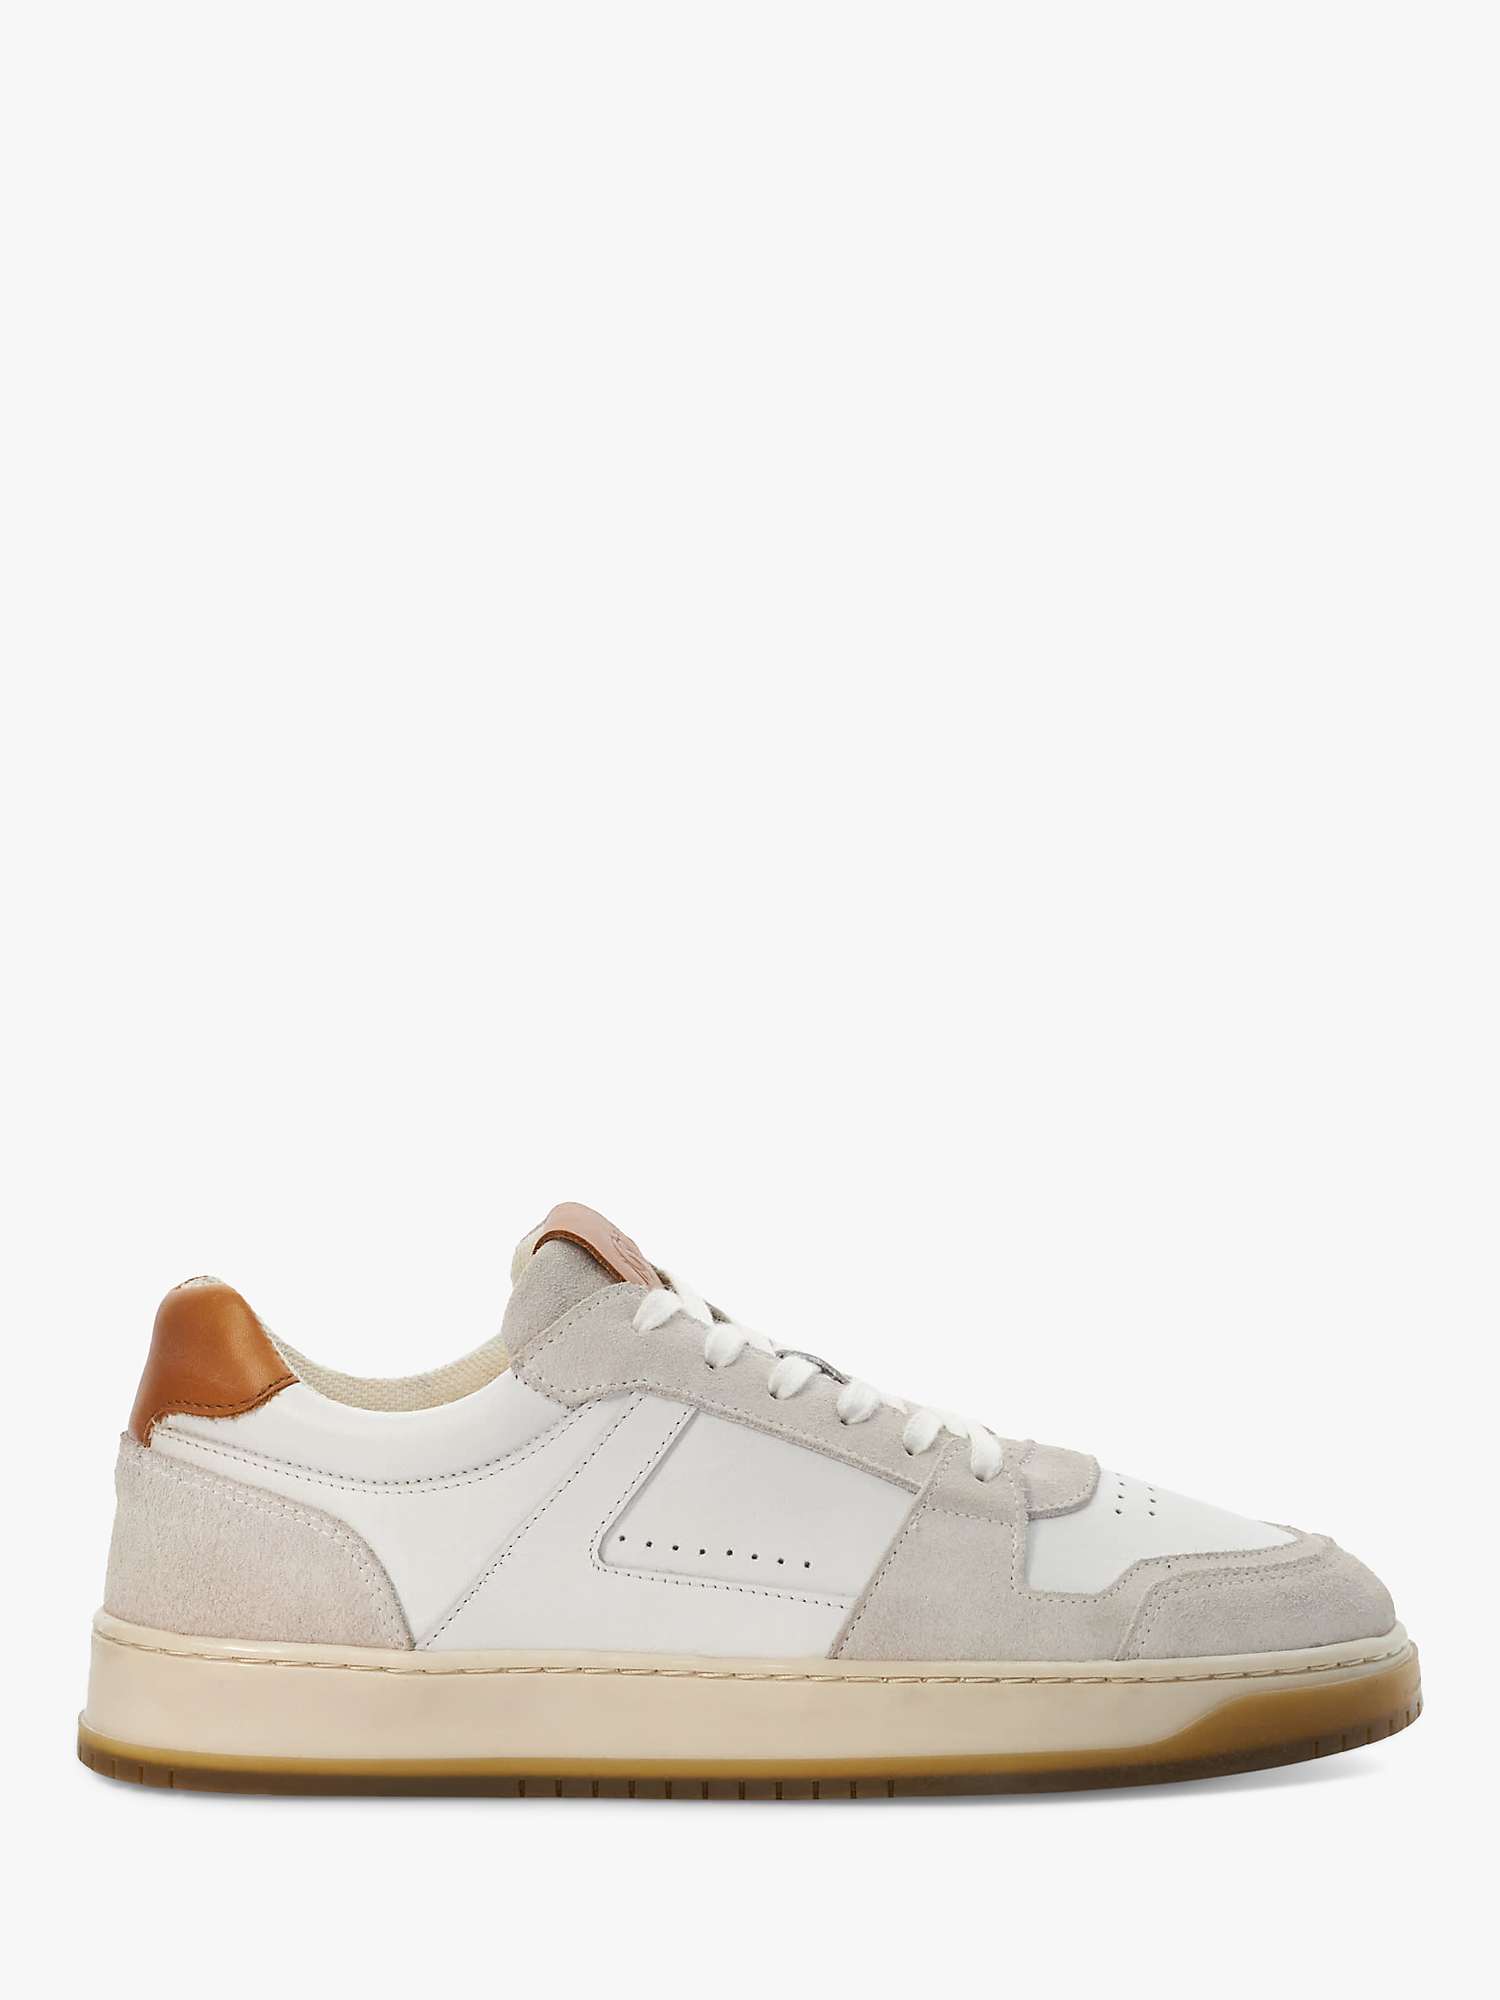 Buy Dune Tylor Suede and Leather Low Top Trainers, White/Grey Online at johnlewis.com